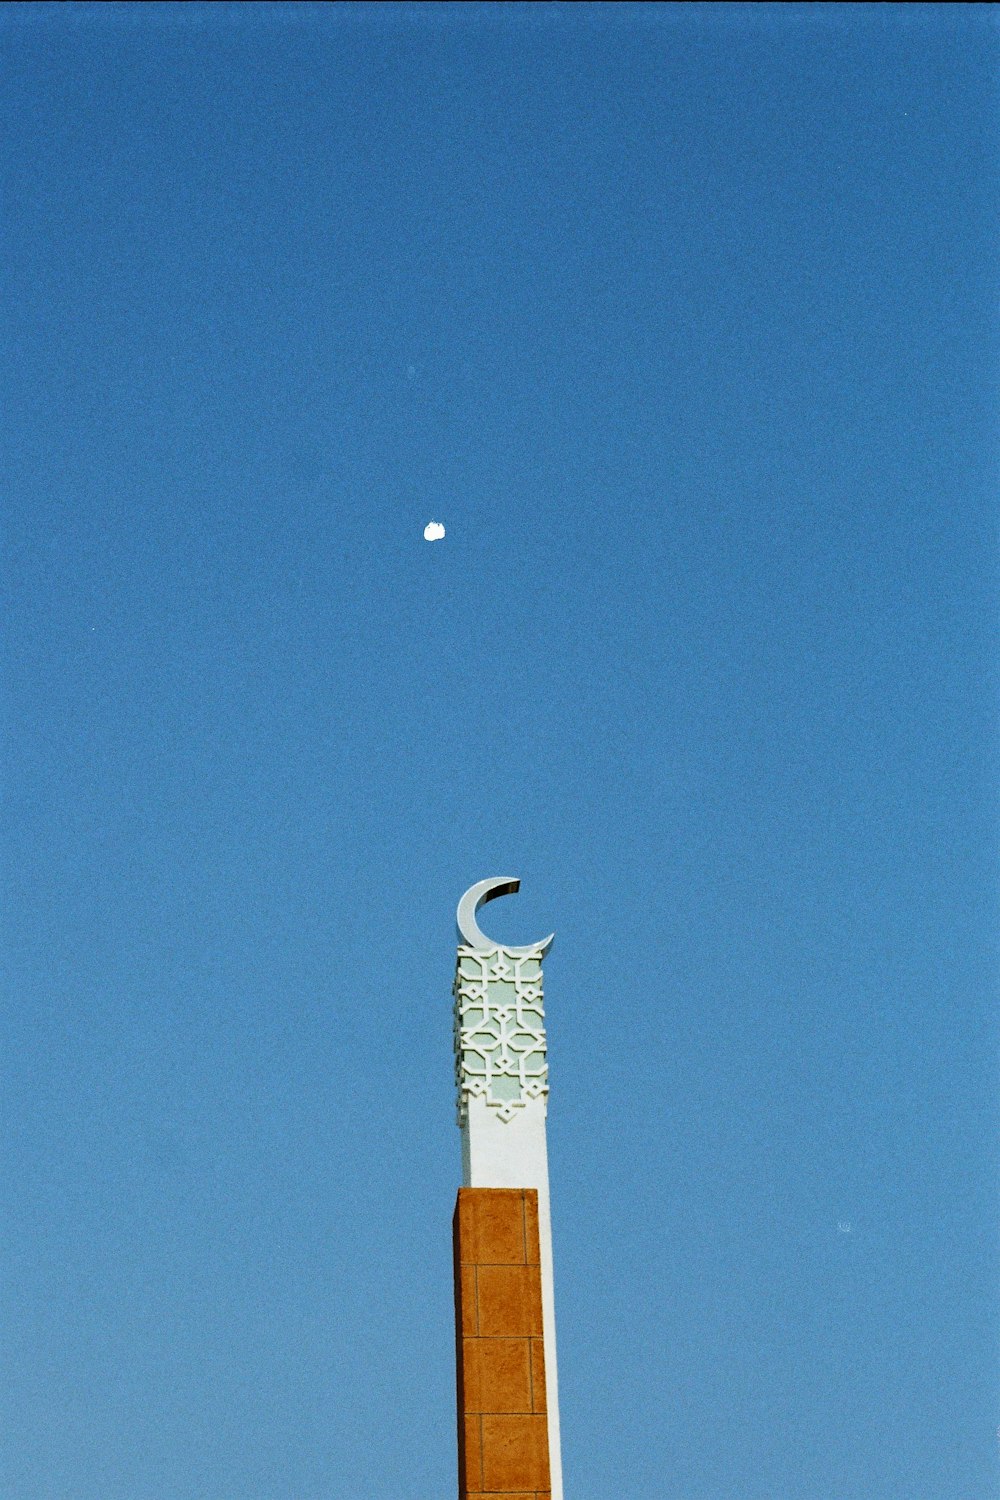 white and brown concrete tower under blue sky